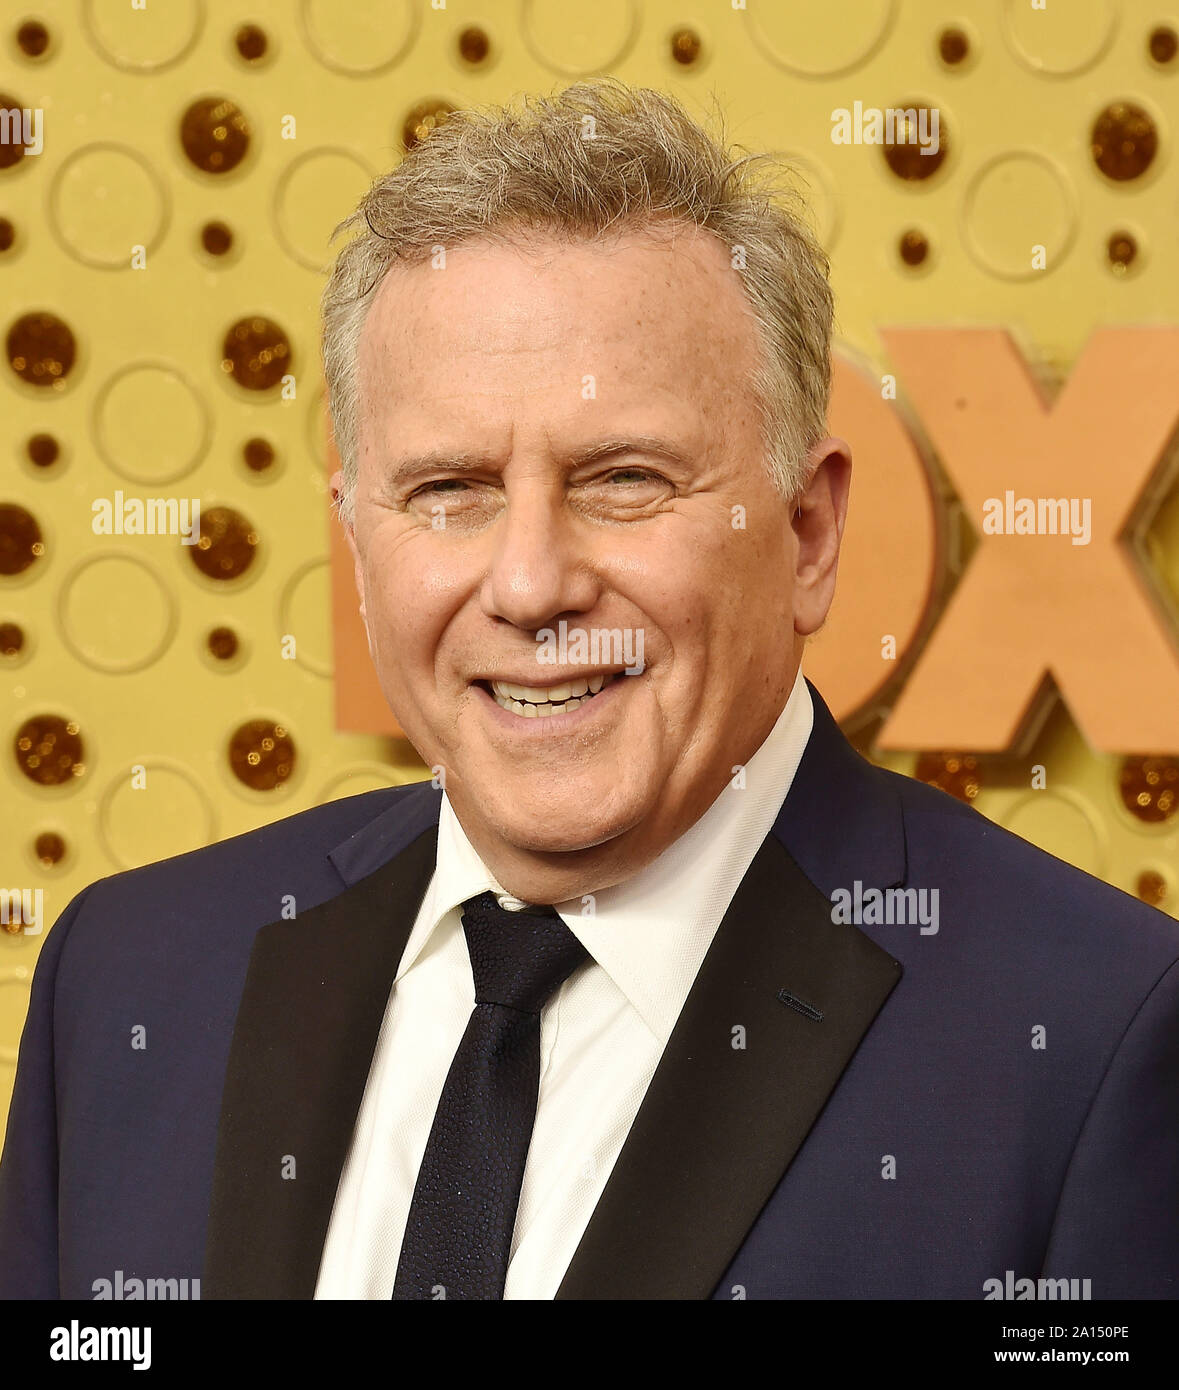 LOS ANGELES, CA - SEPTEMBER 22: Paul Reiser attends the 71st Emmy Awards at Microsoft Theater on September 22, 2019 in Los Angeles, California. Stock Photo